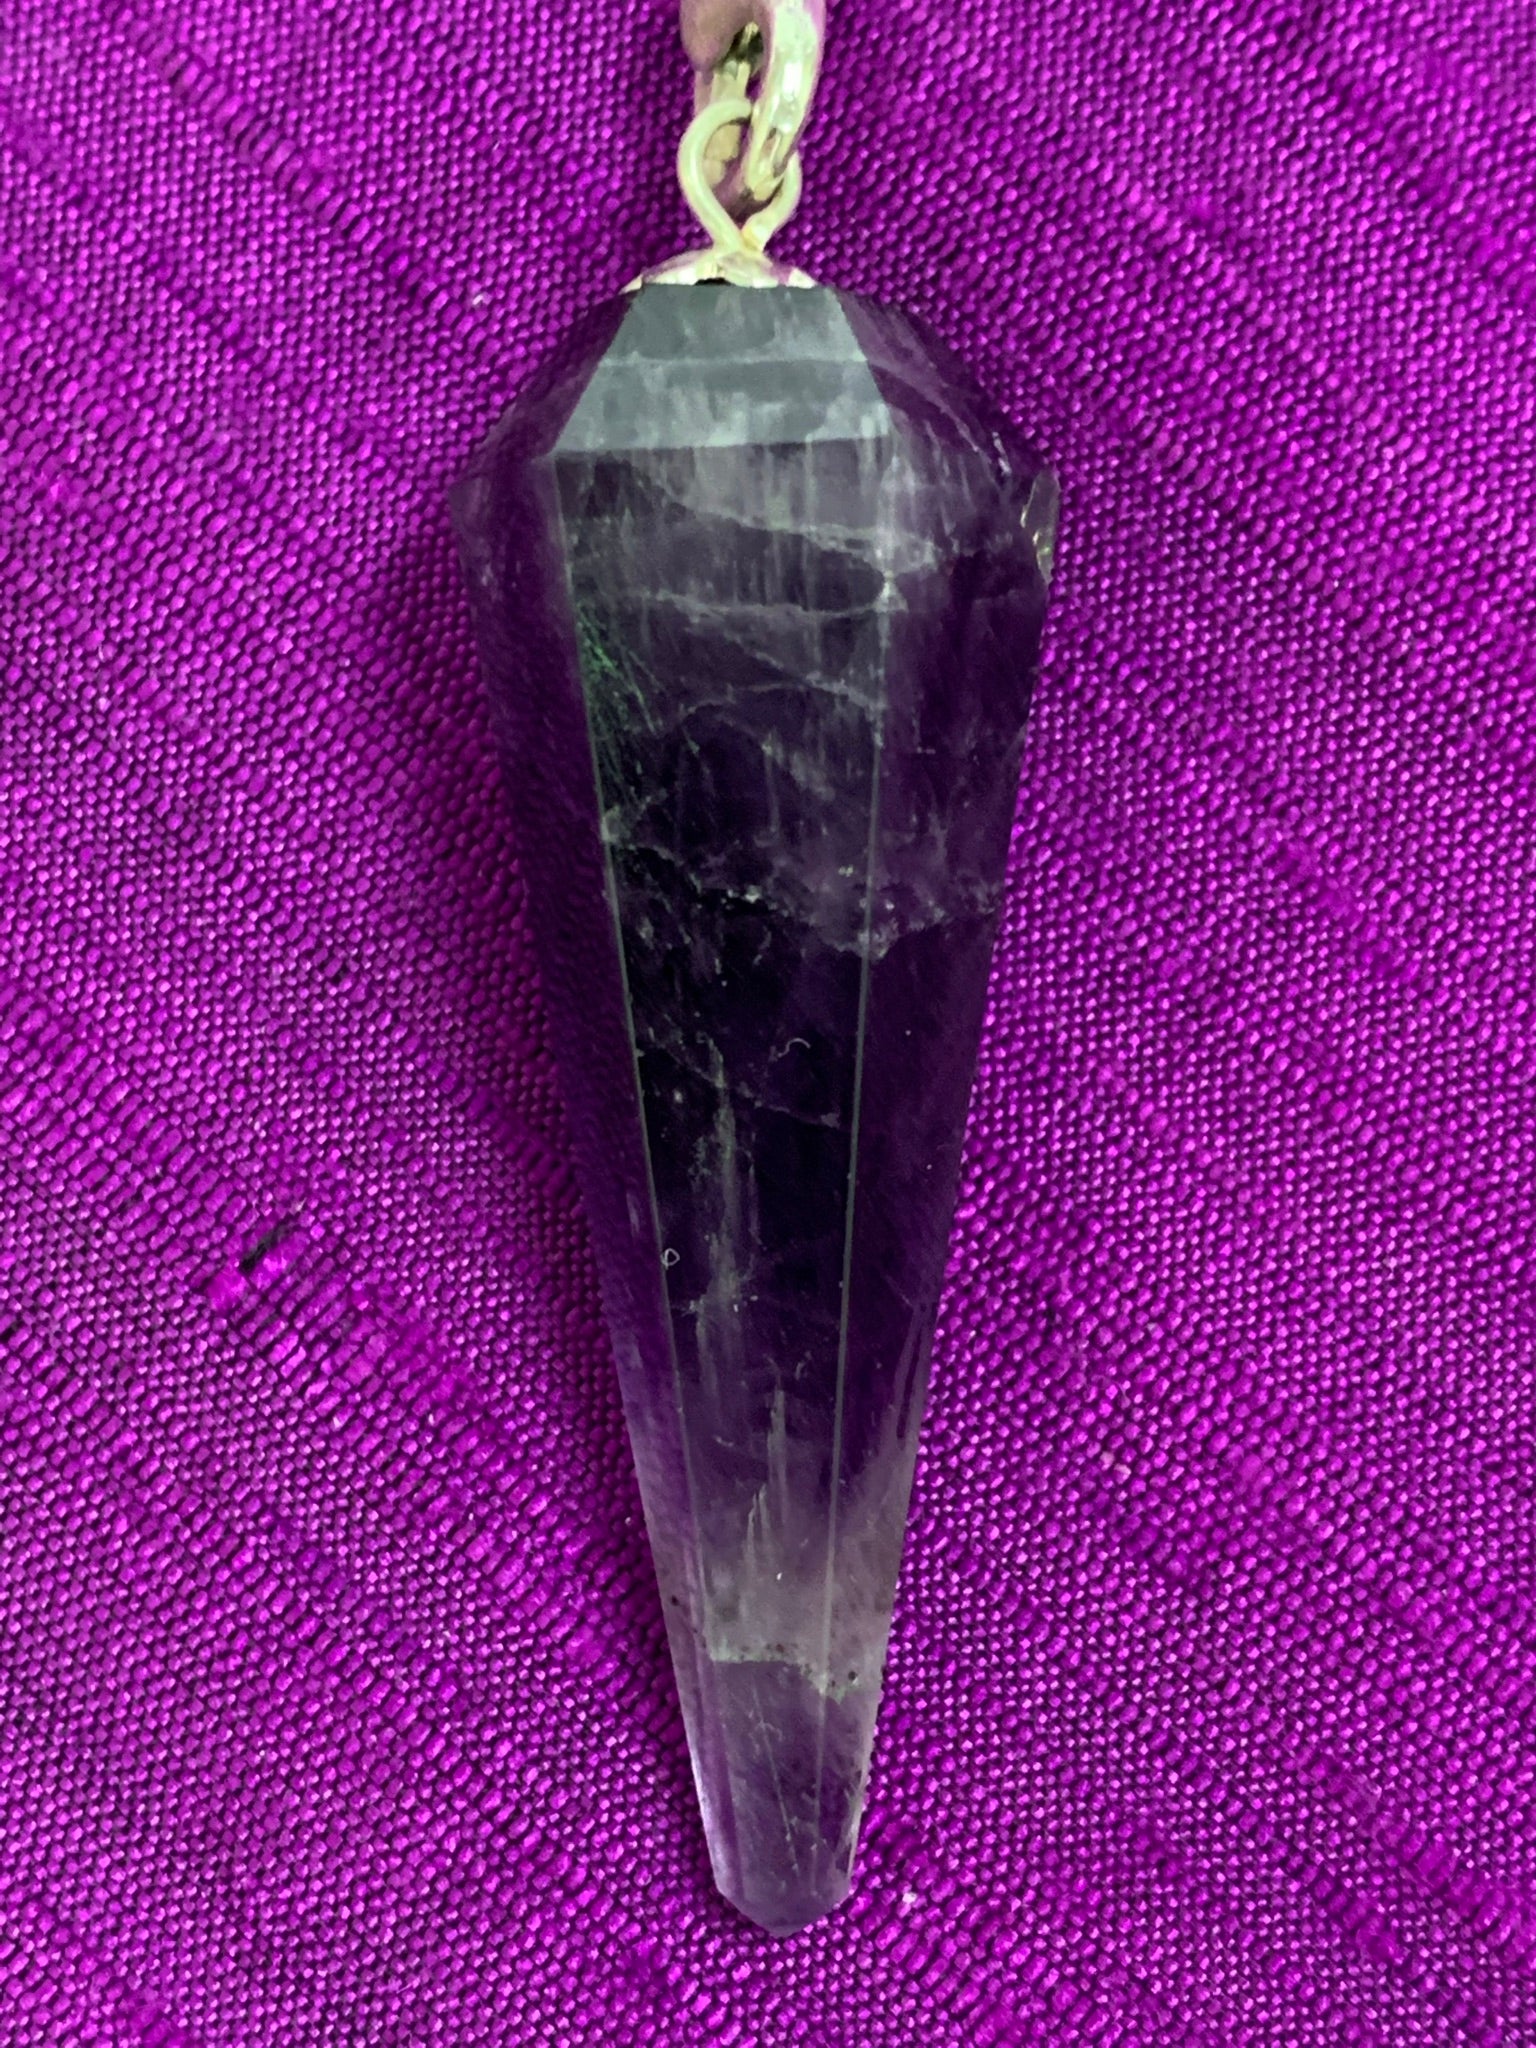 Close-up view of the amethyst stone at the end of the pendulum chain. 